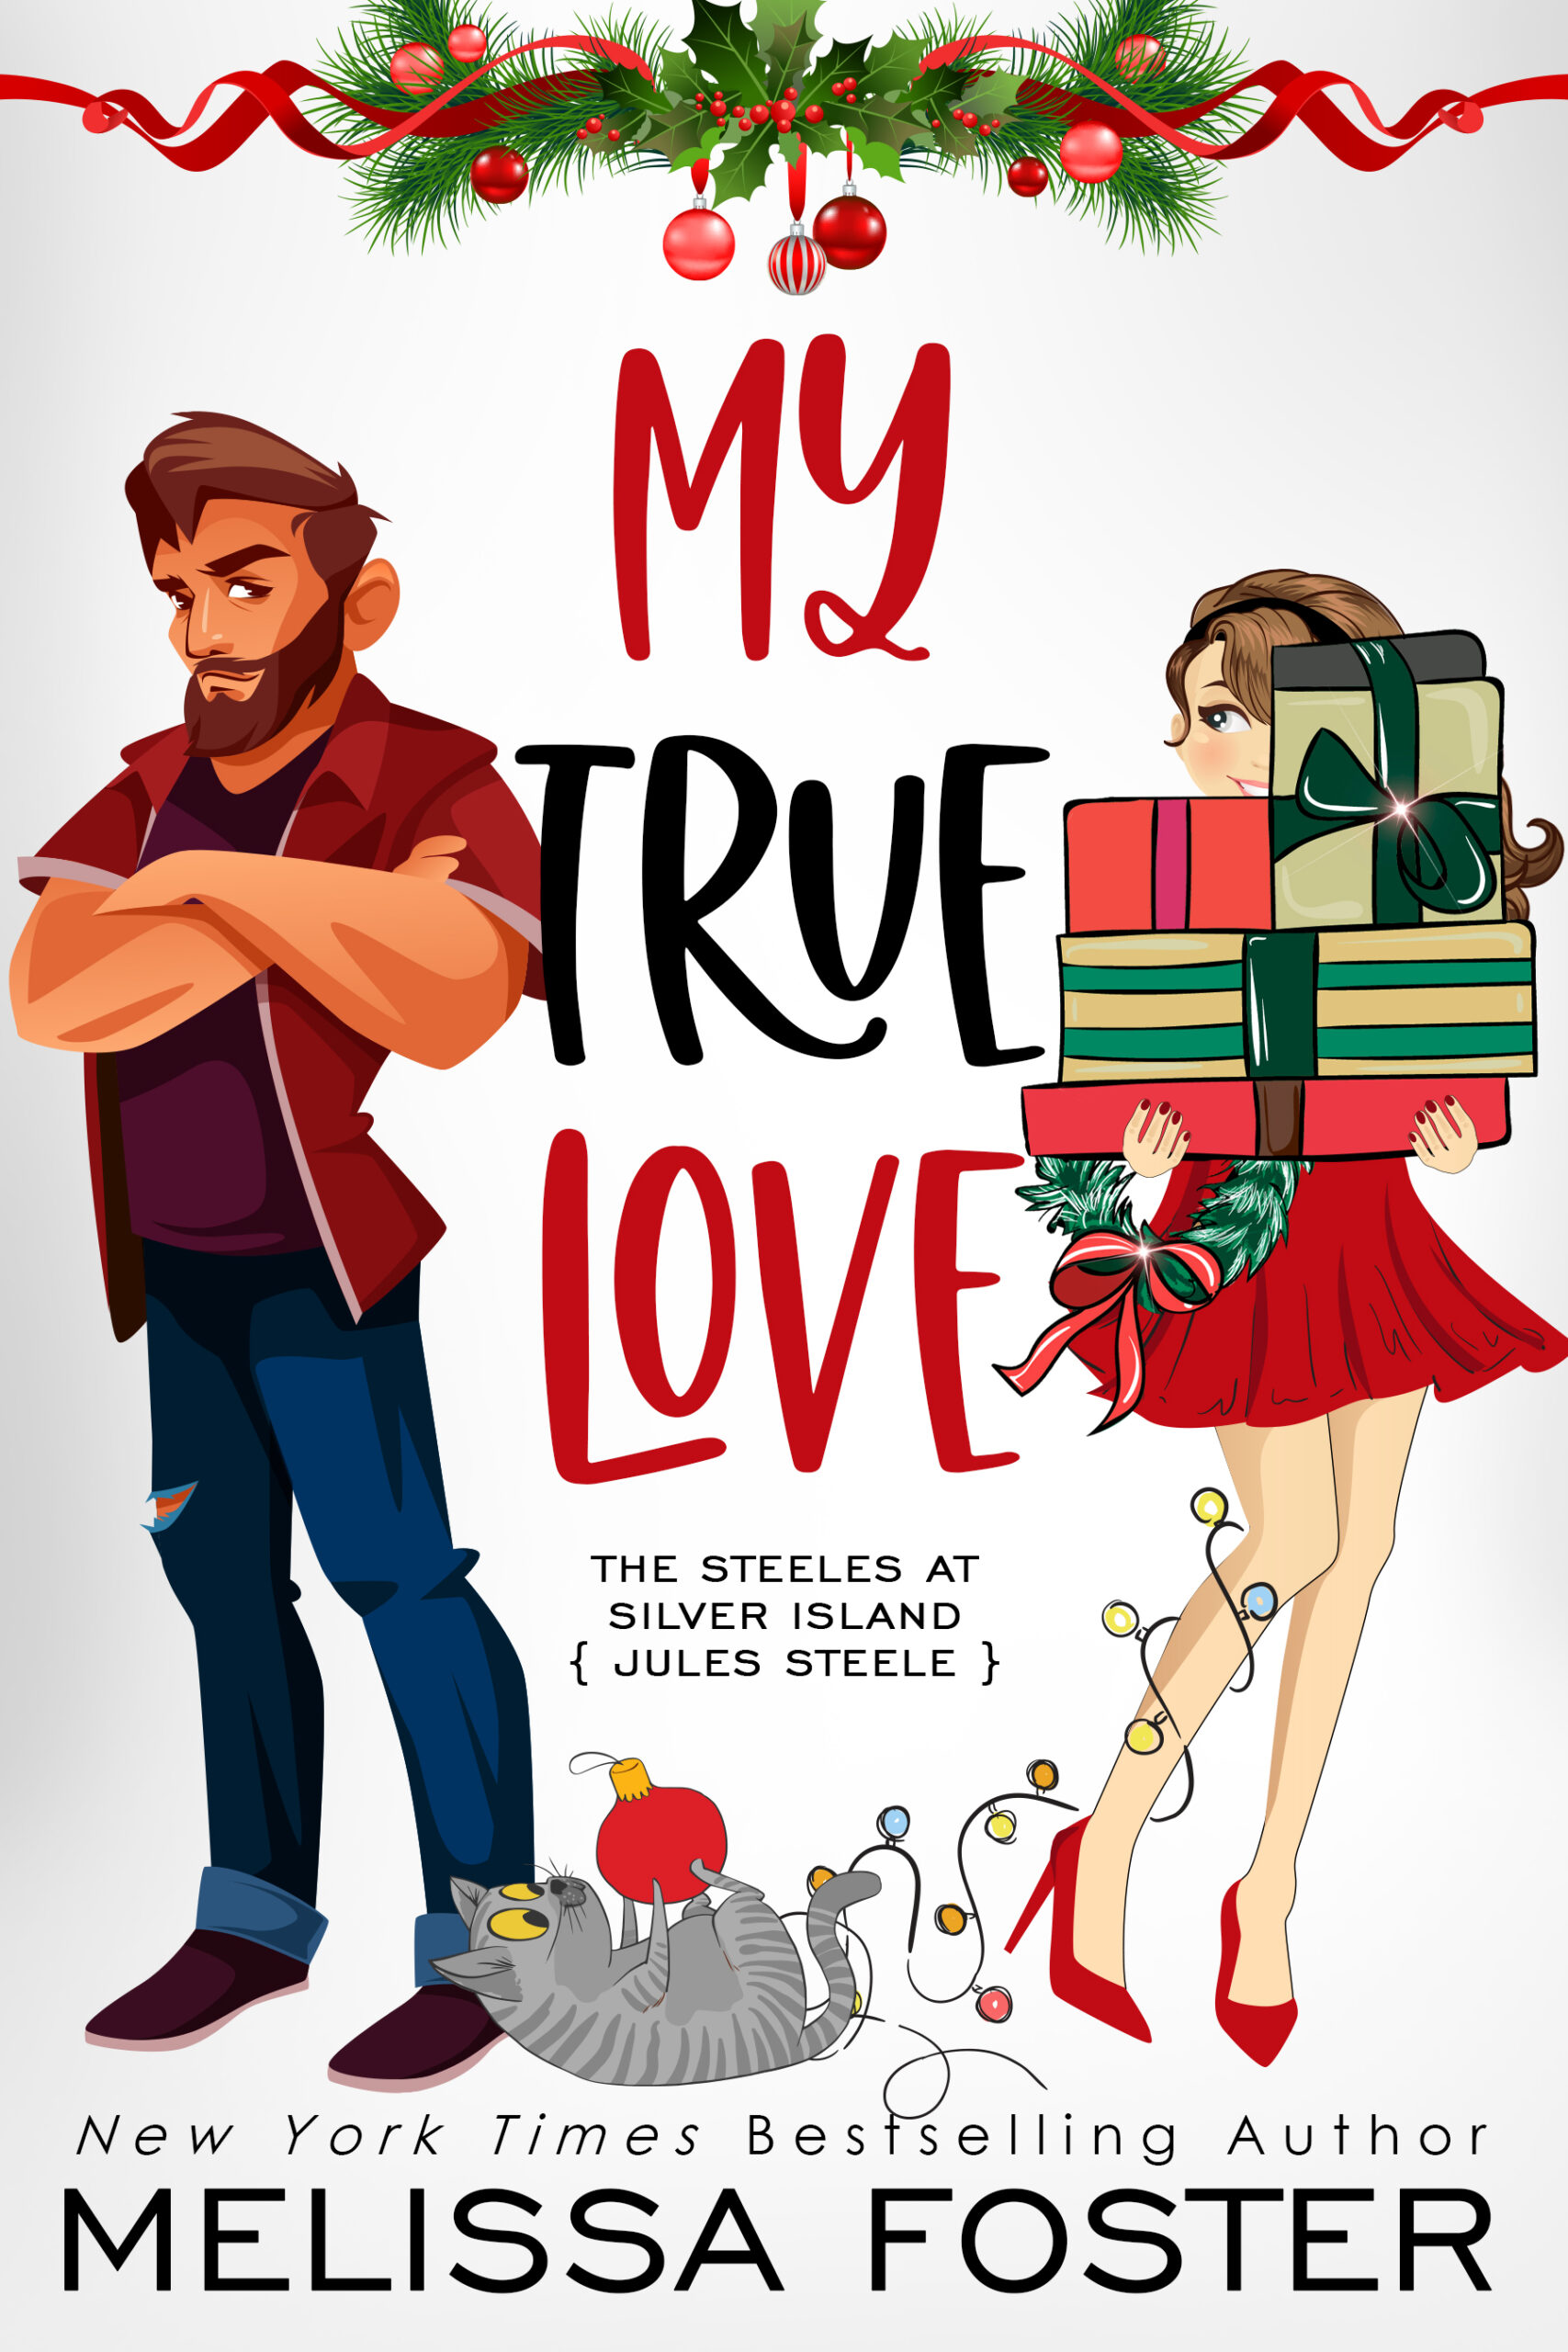 My True Love Holiday Edition Cover by Melissa Foster